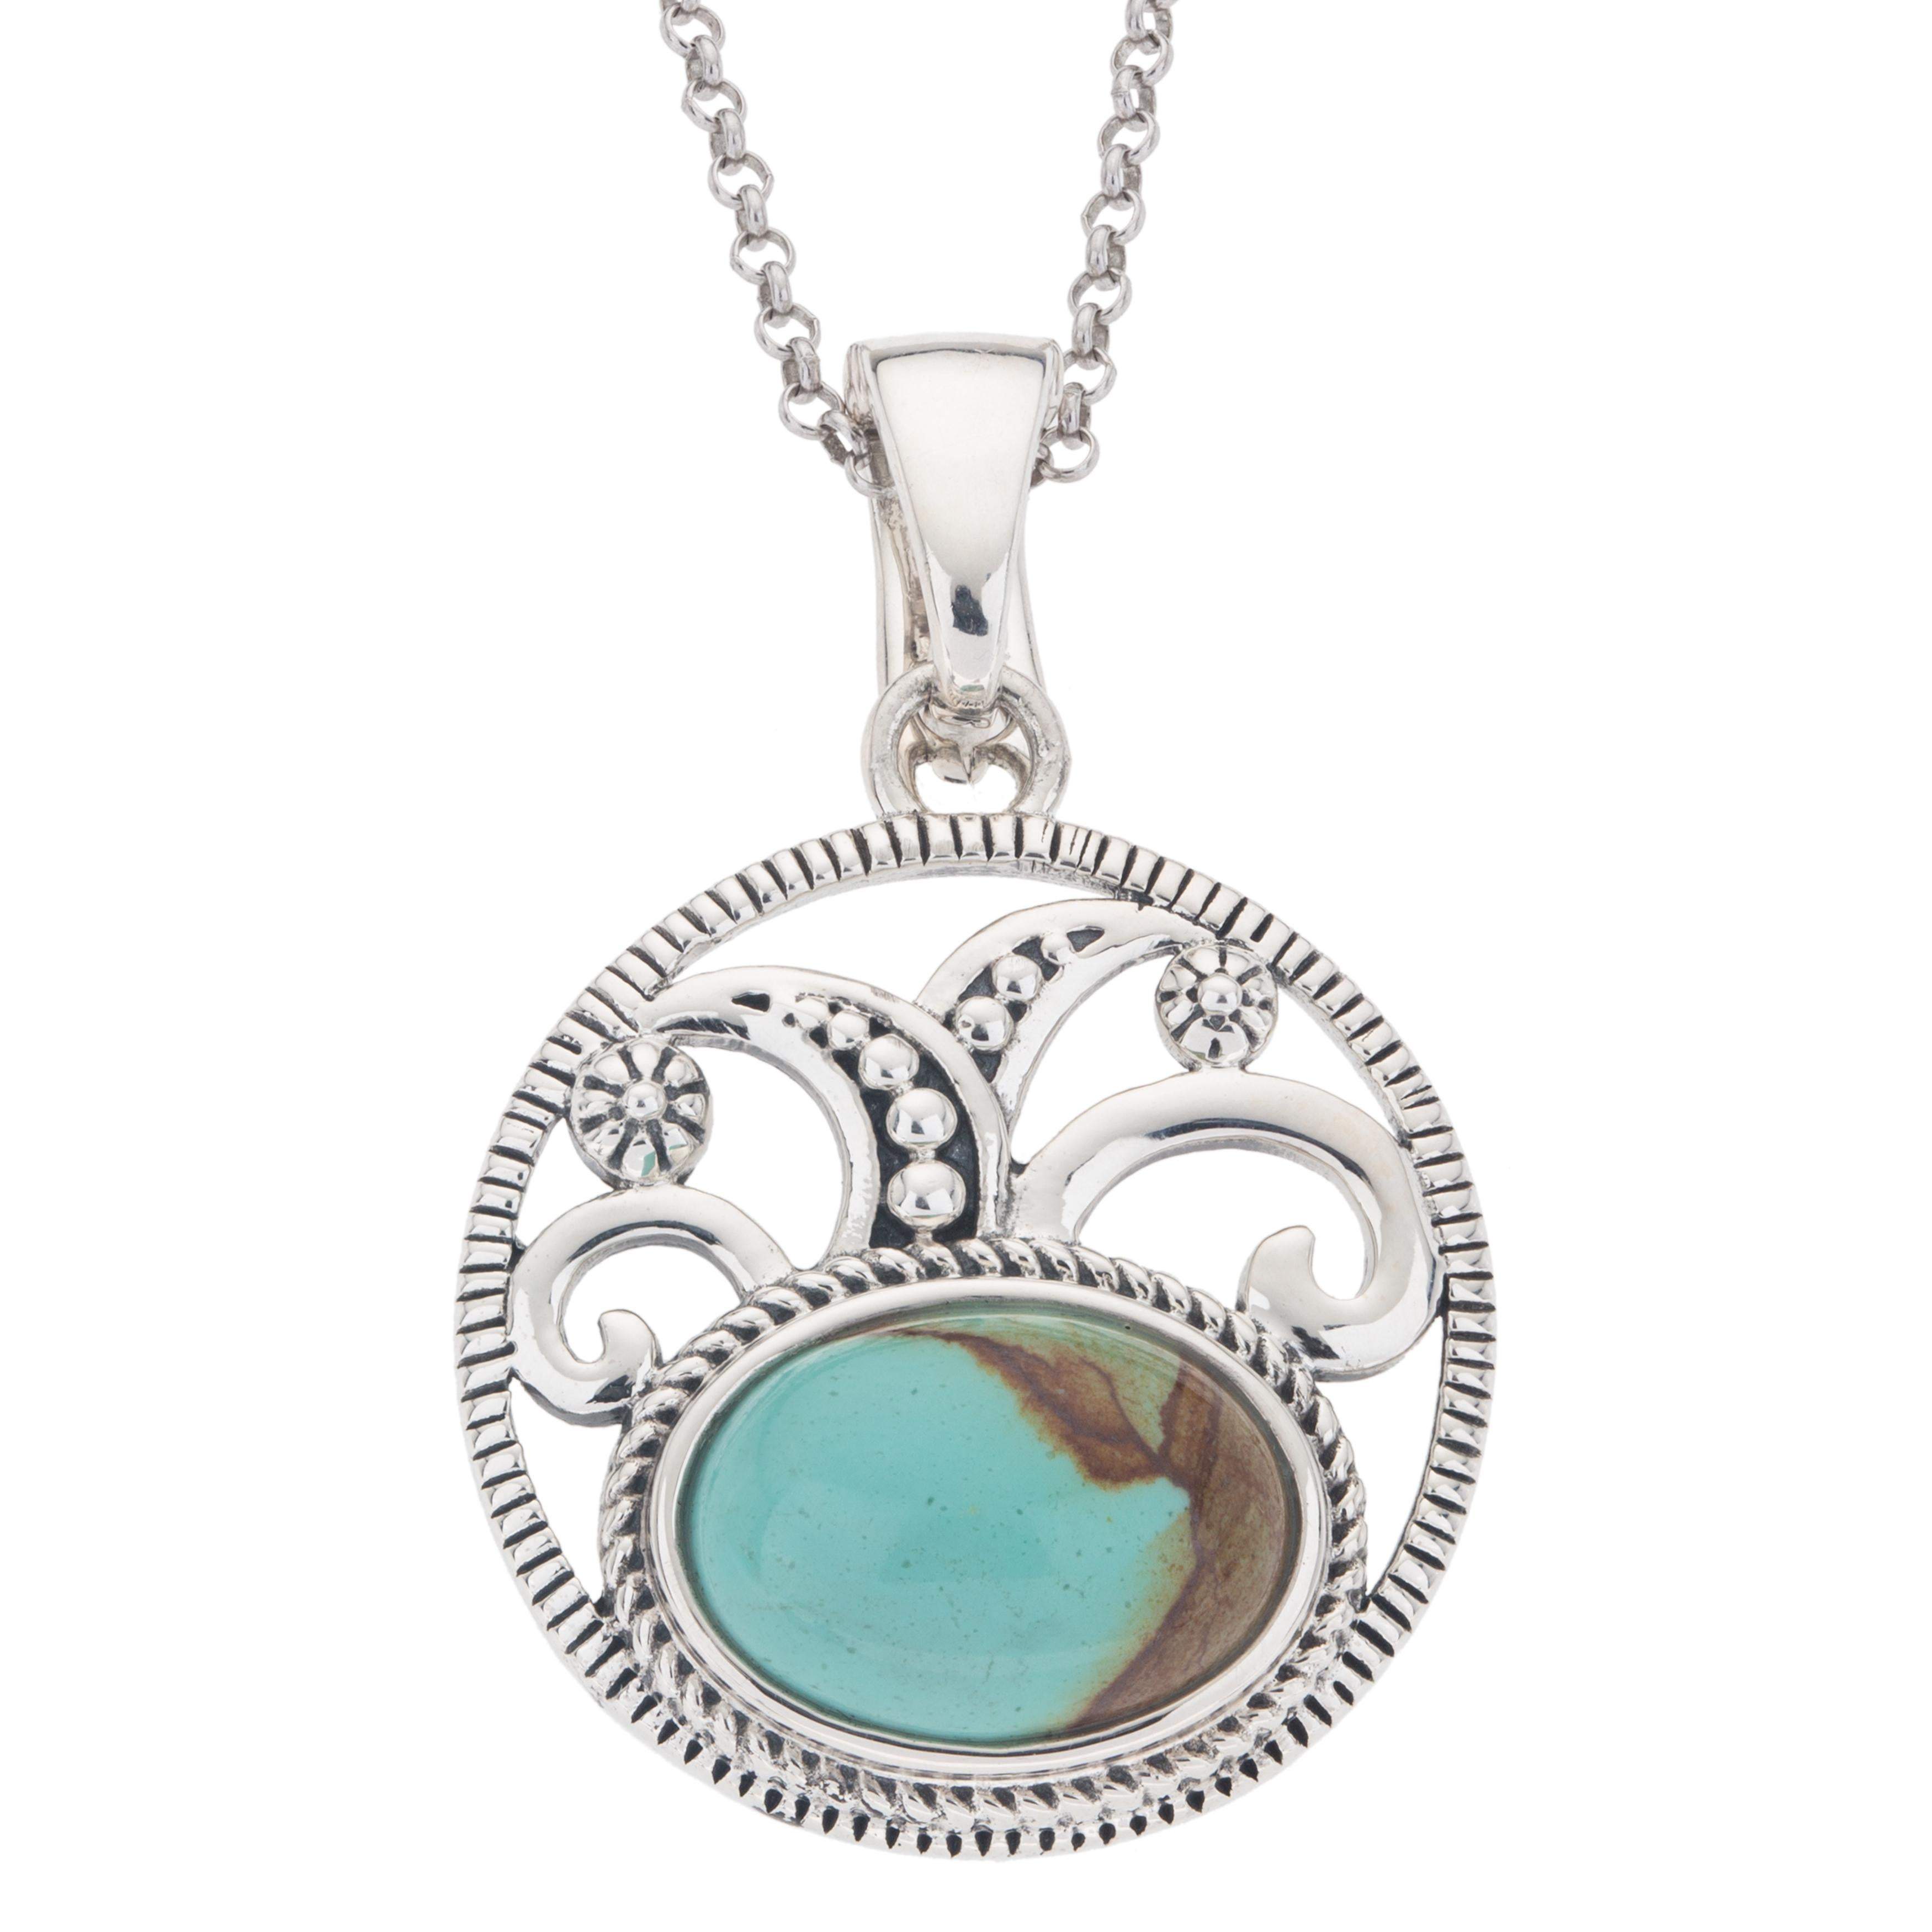 Silver 30x23mm Oval #8 Turquoise Pendant Necklace - Shop Thrifty Treasures